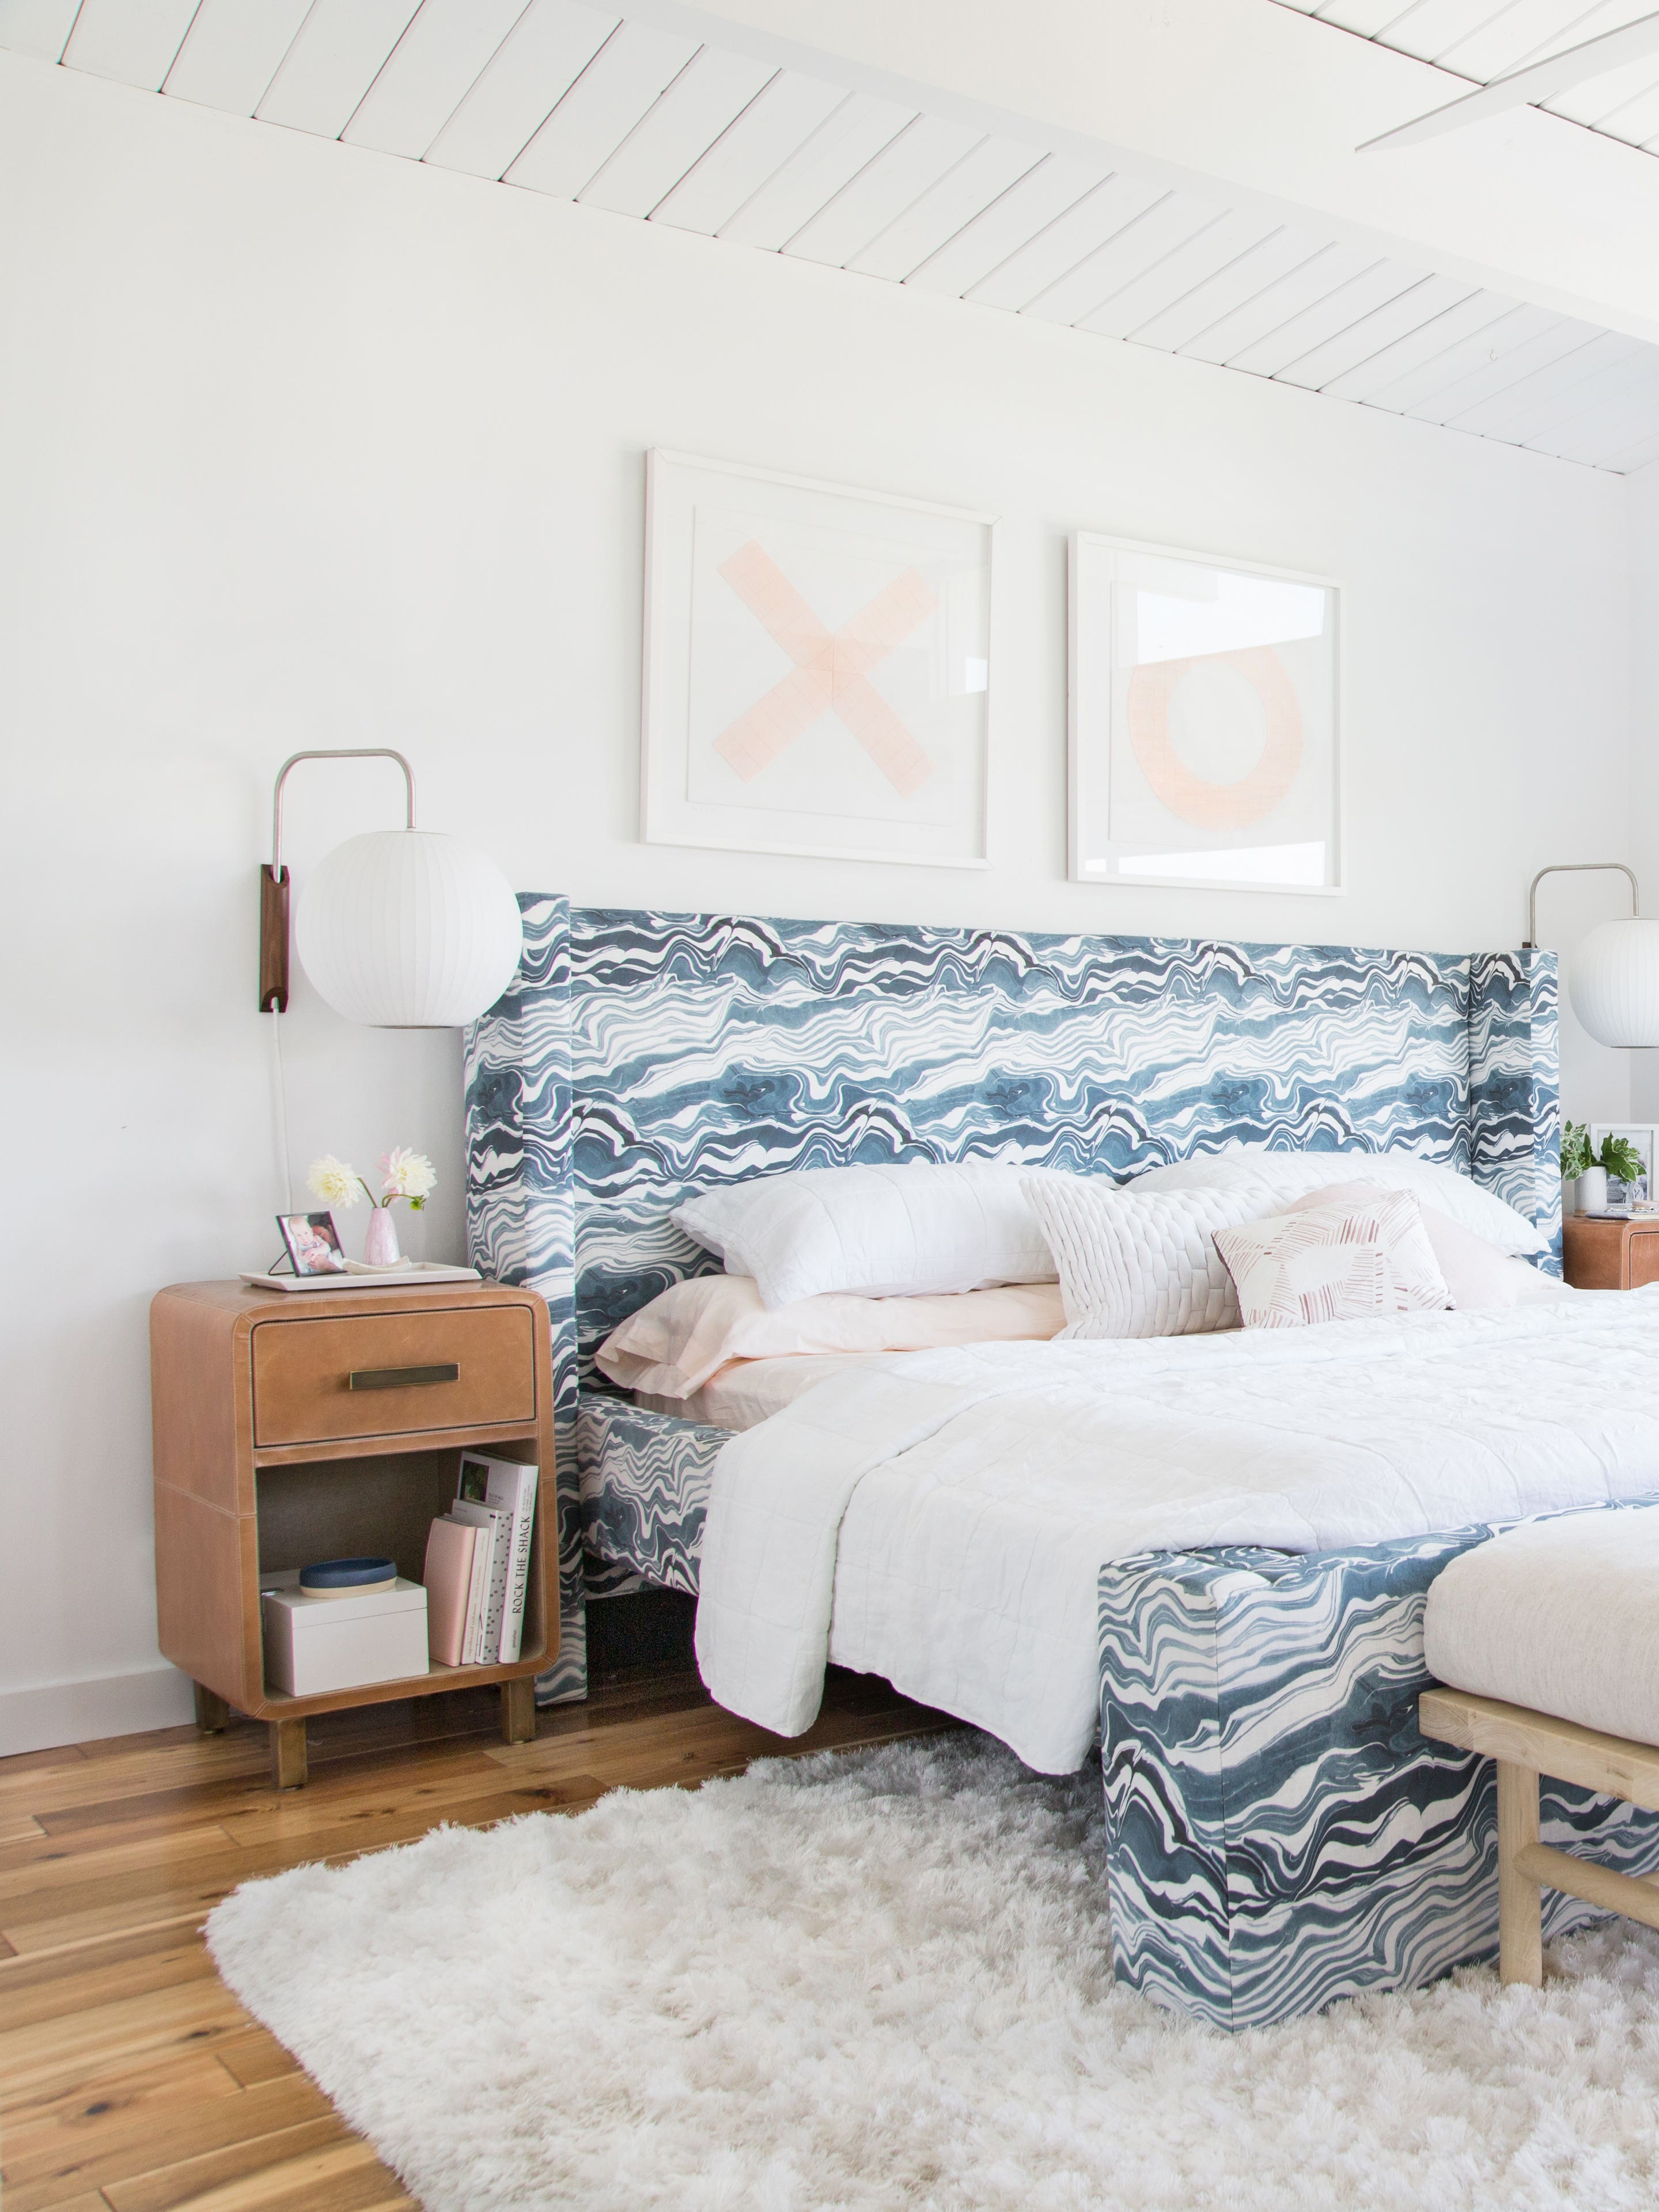 These Sun-Drenched Bedrooms Are the Vacation We Desperately Need